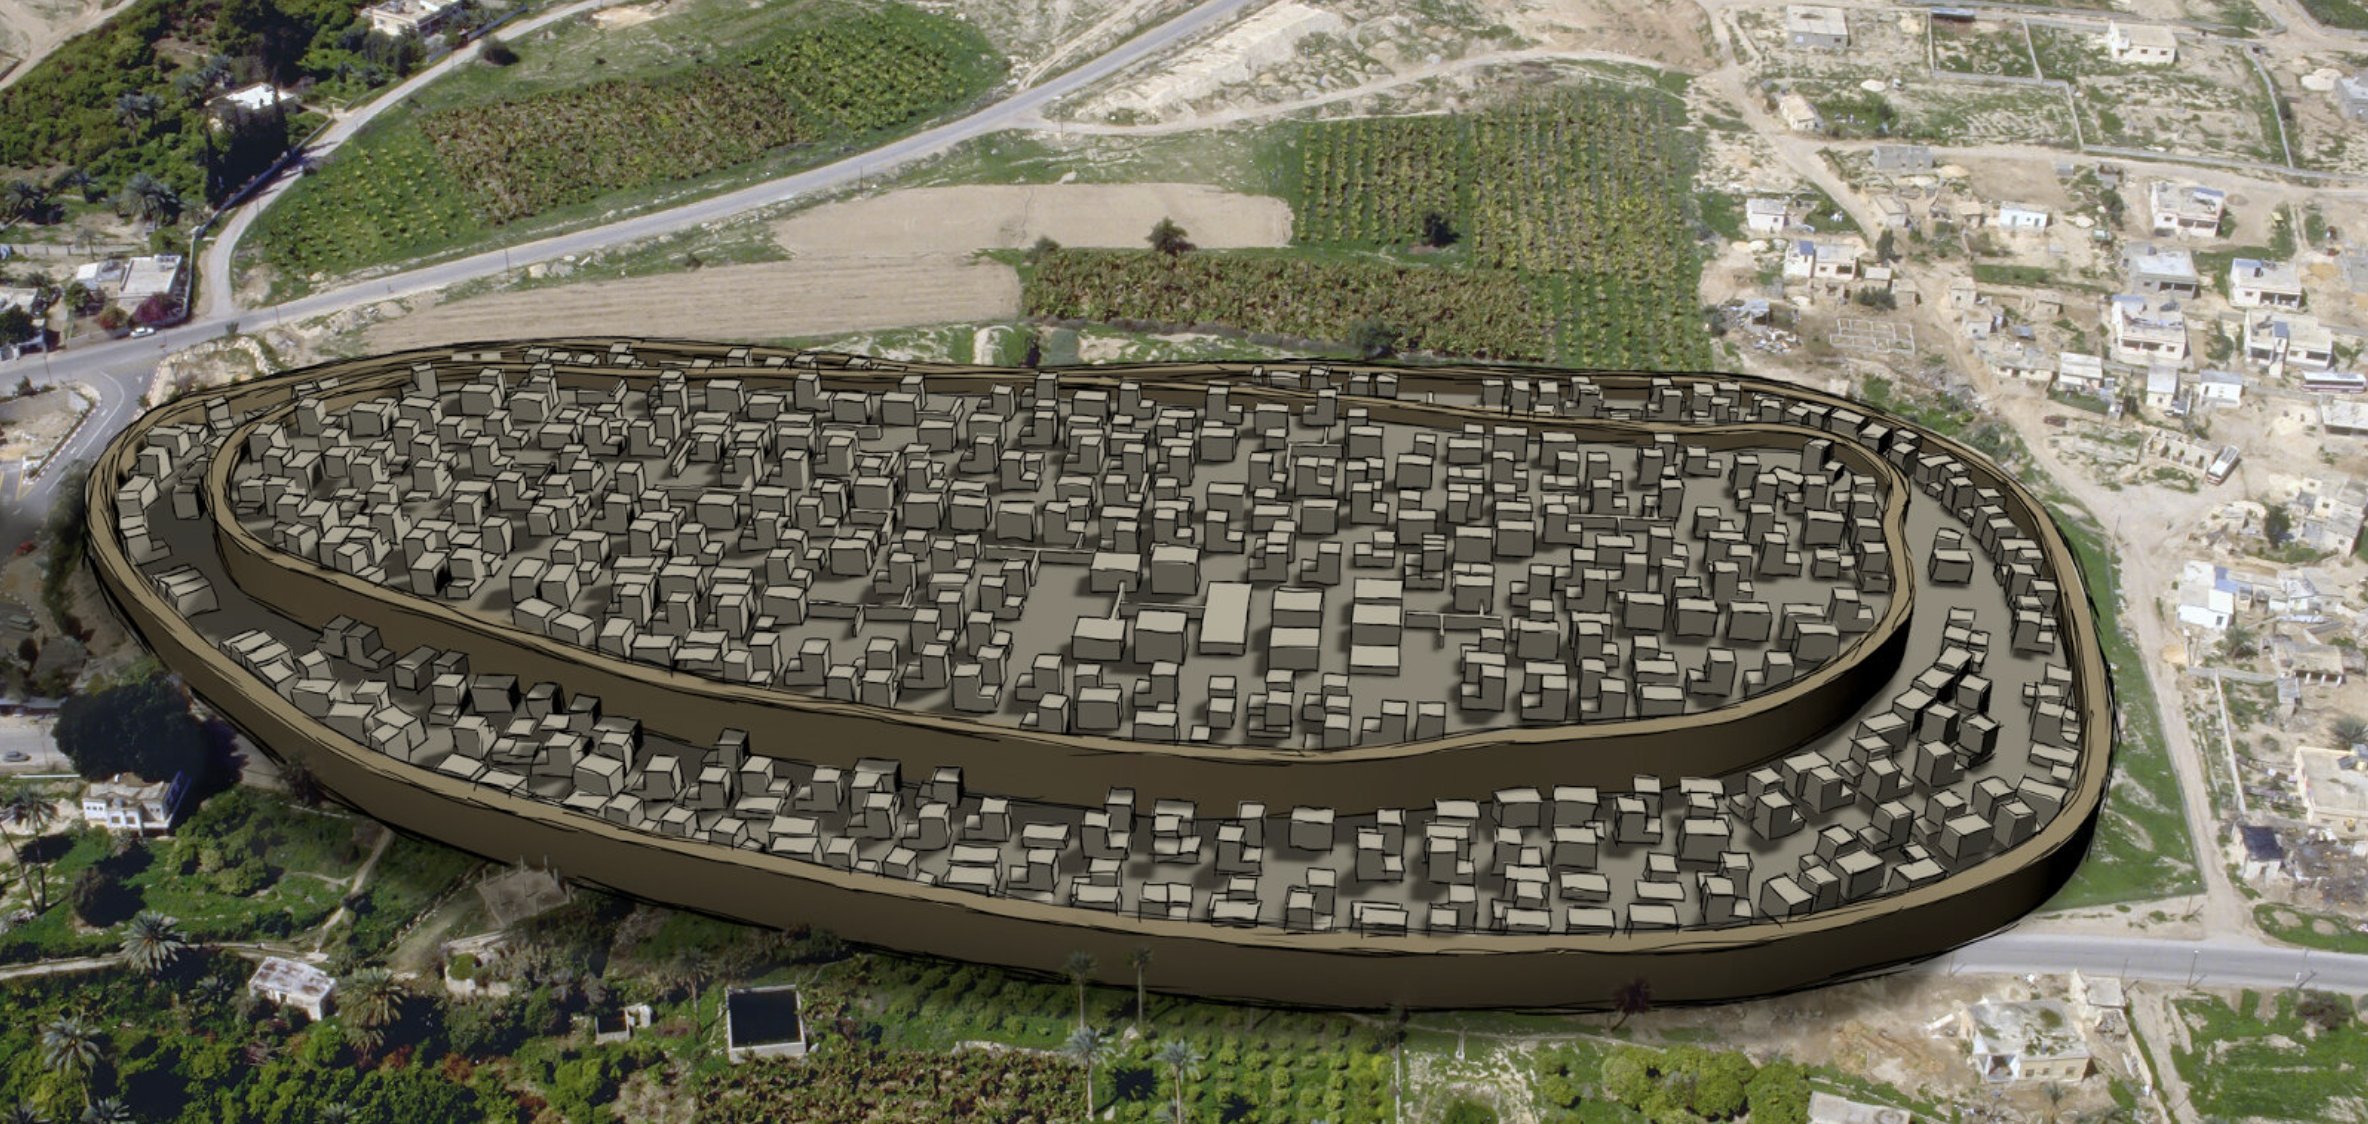 A 3-D reconstruction of ancient Jericho with its heavy fortifications and sophisticated wall network.